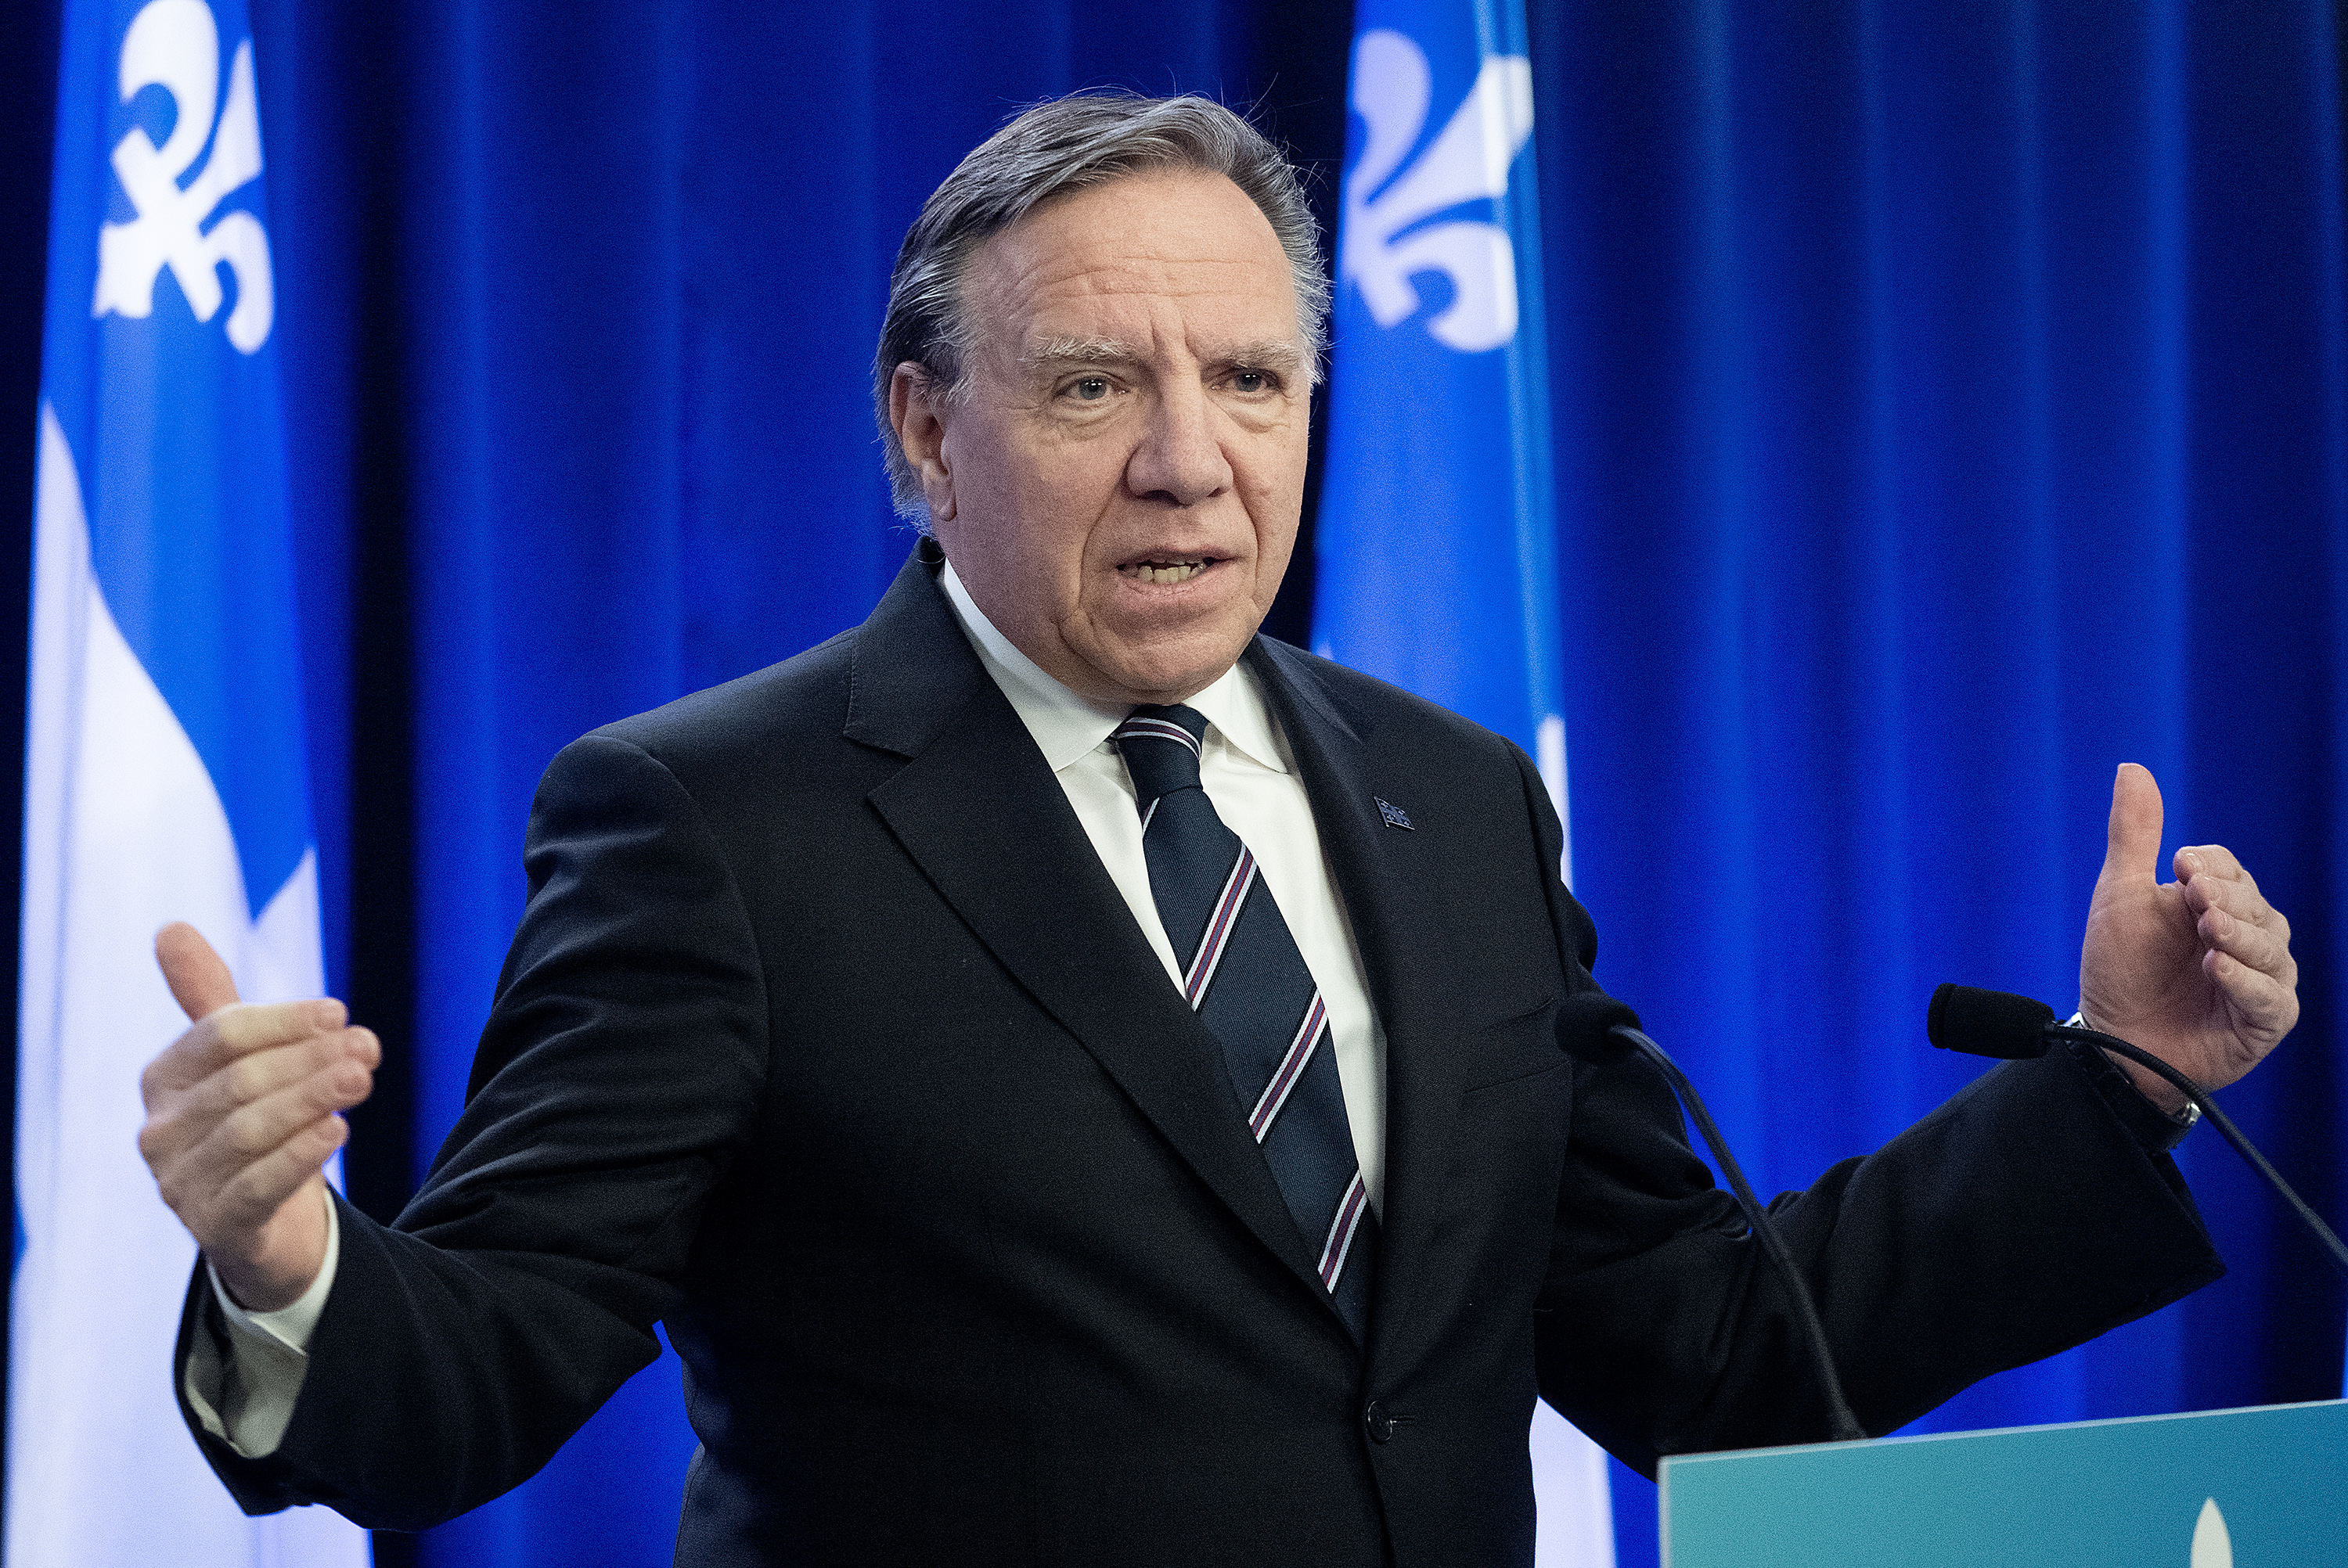 ‘Makes me sad’: New poll sees Legault losing ground to Parti Québécois